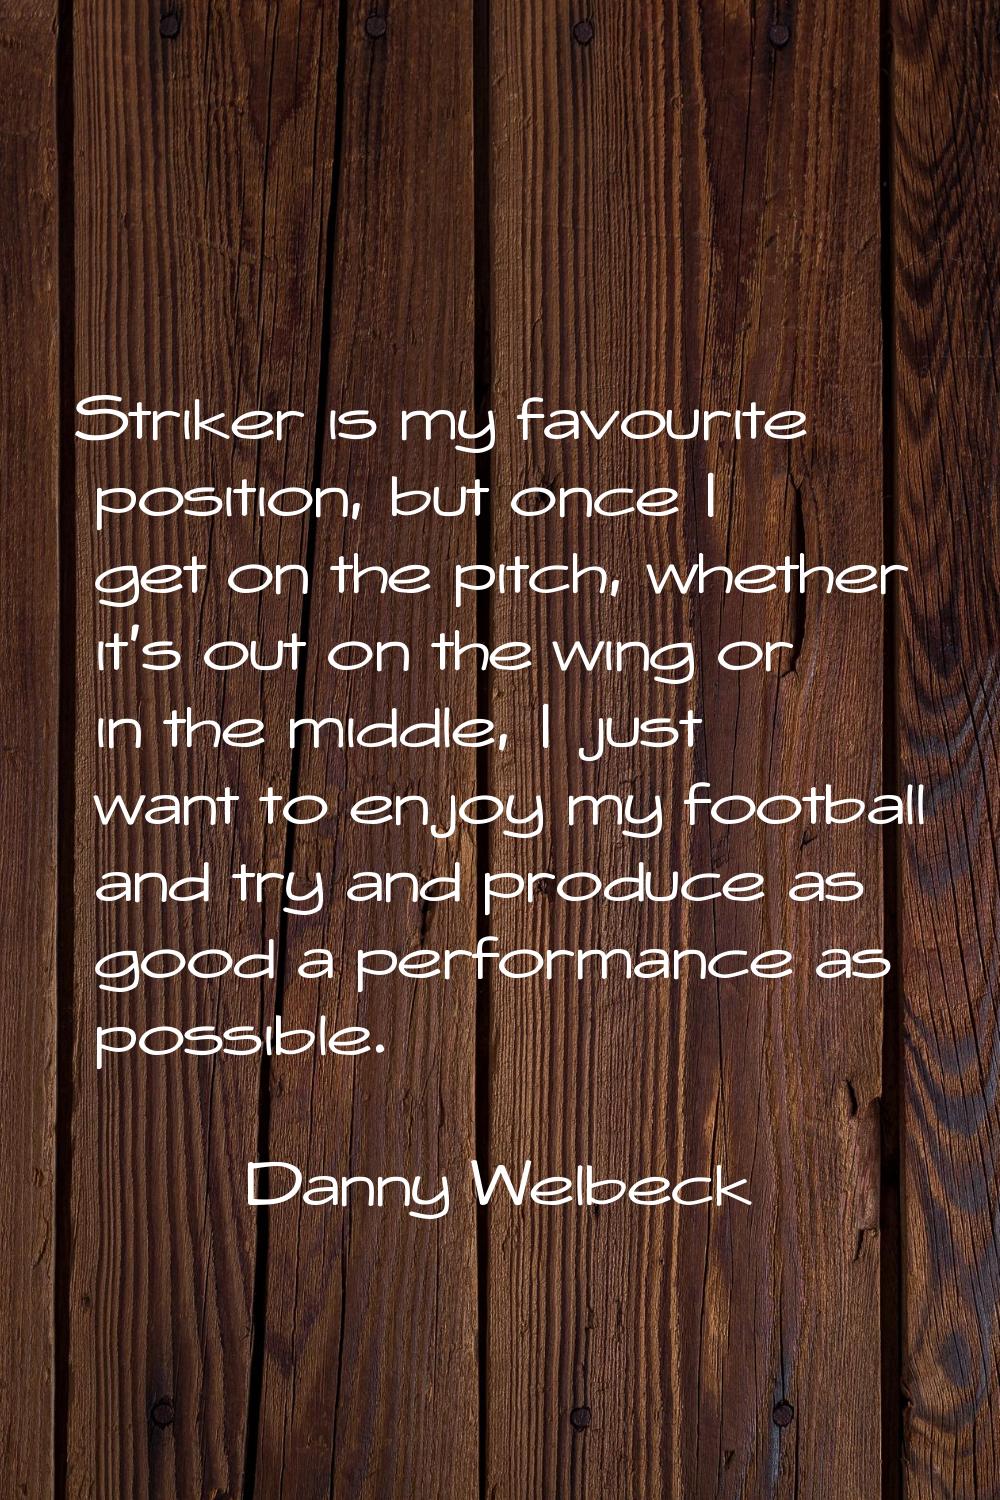 Striker is my favourite position, but once I get on the pitch, whether it's out on the wing or in t